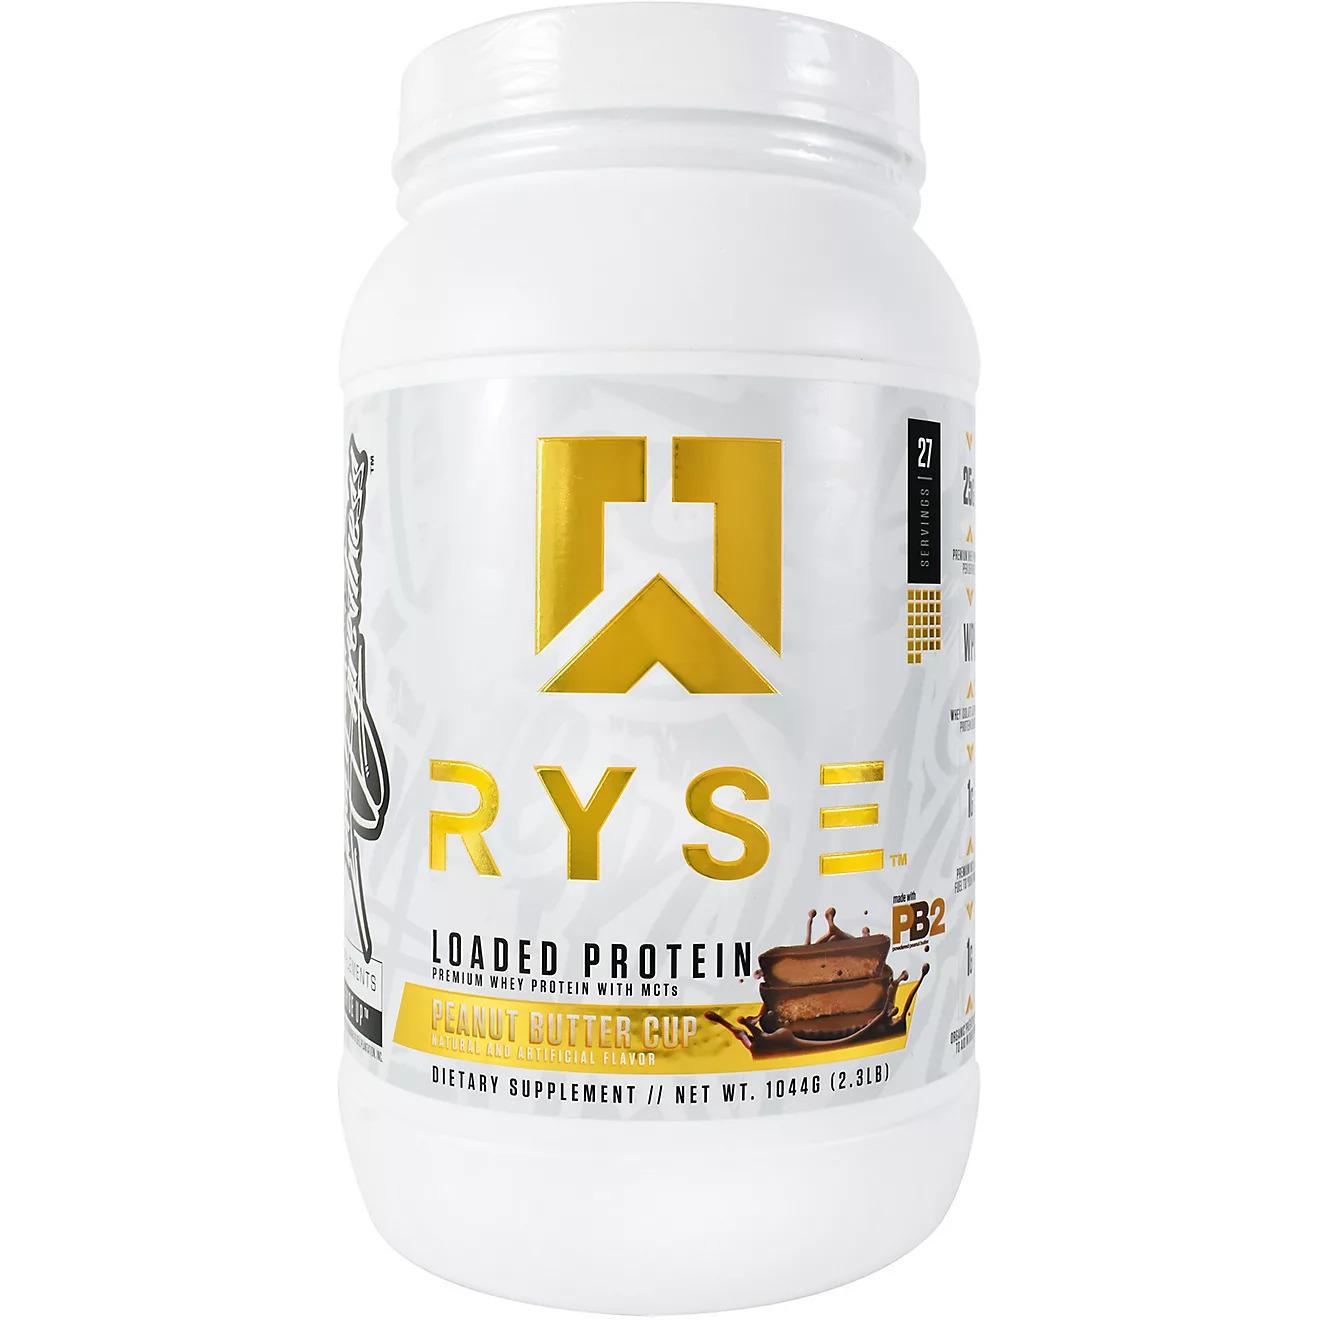 Ryse Core Series Loaded Protein, Build, Recover, Strength, 25g Whey  Protein, Added Prebiotic Fiber and MCTs, Low Carbs & Low Sugar